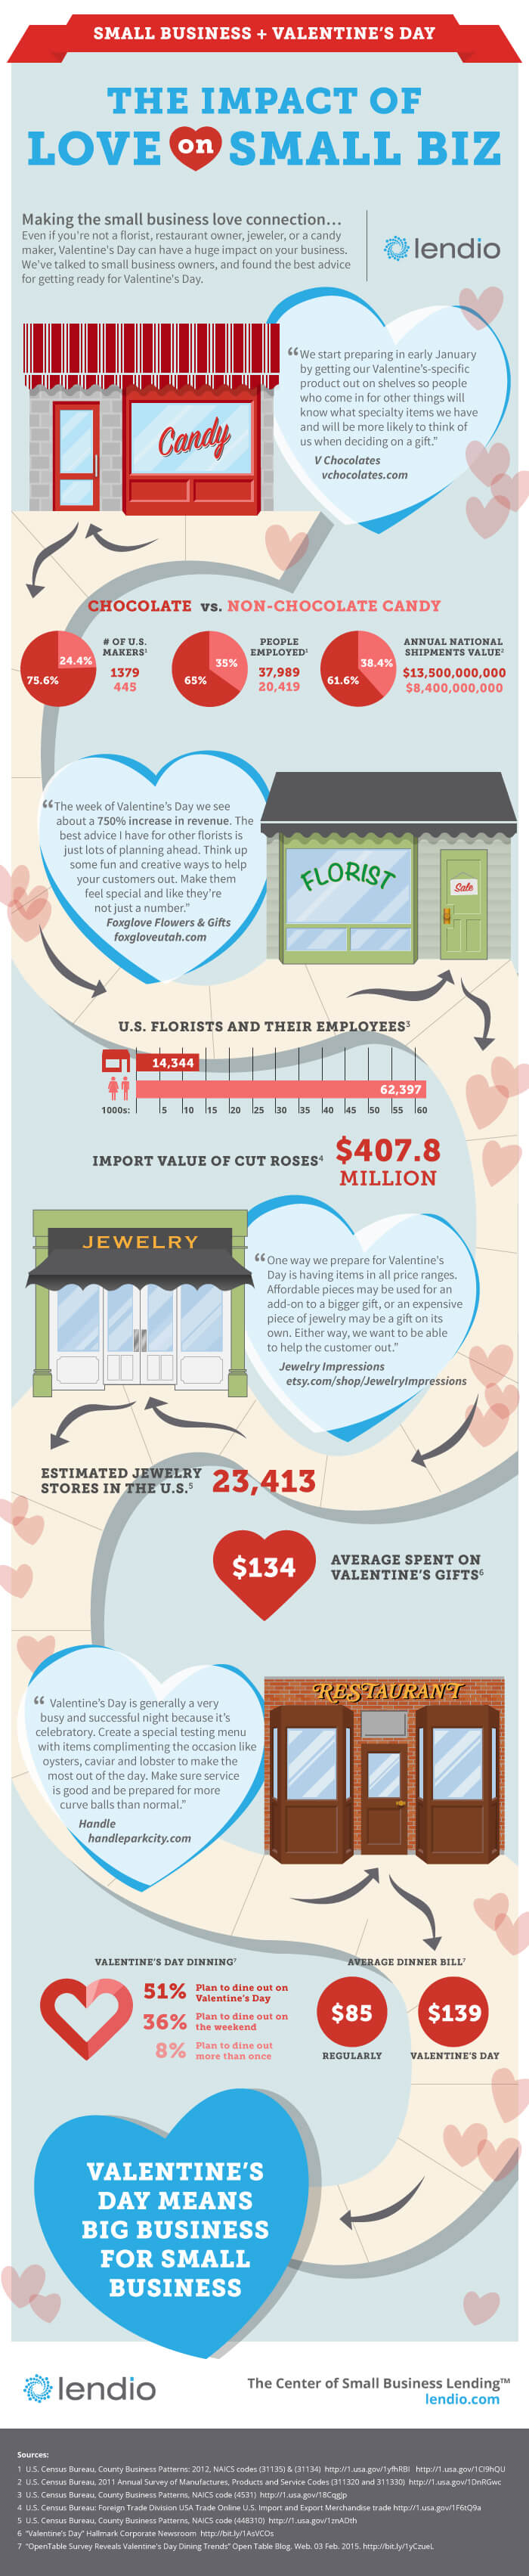 Valentines Impact On Small Business